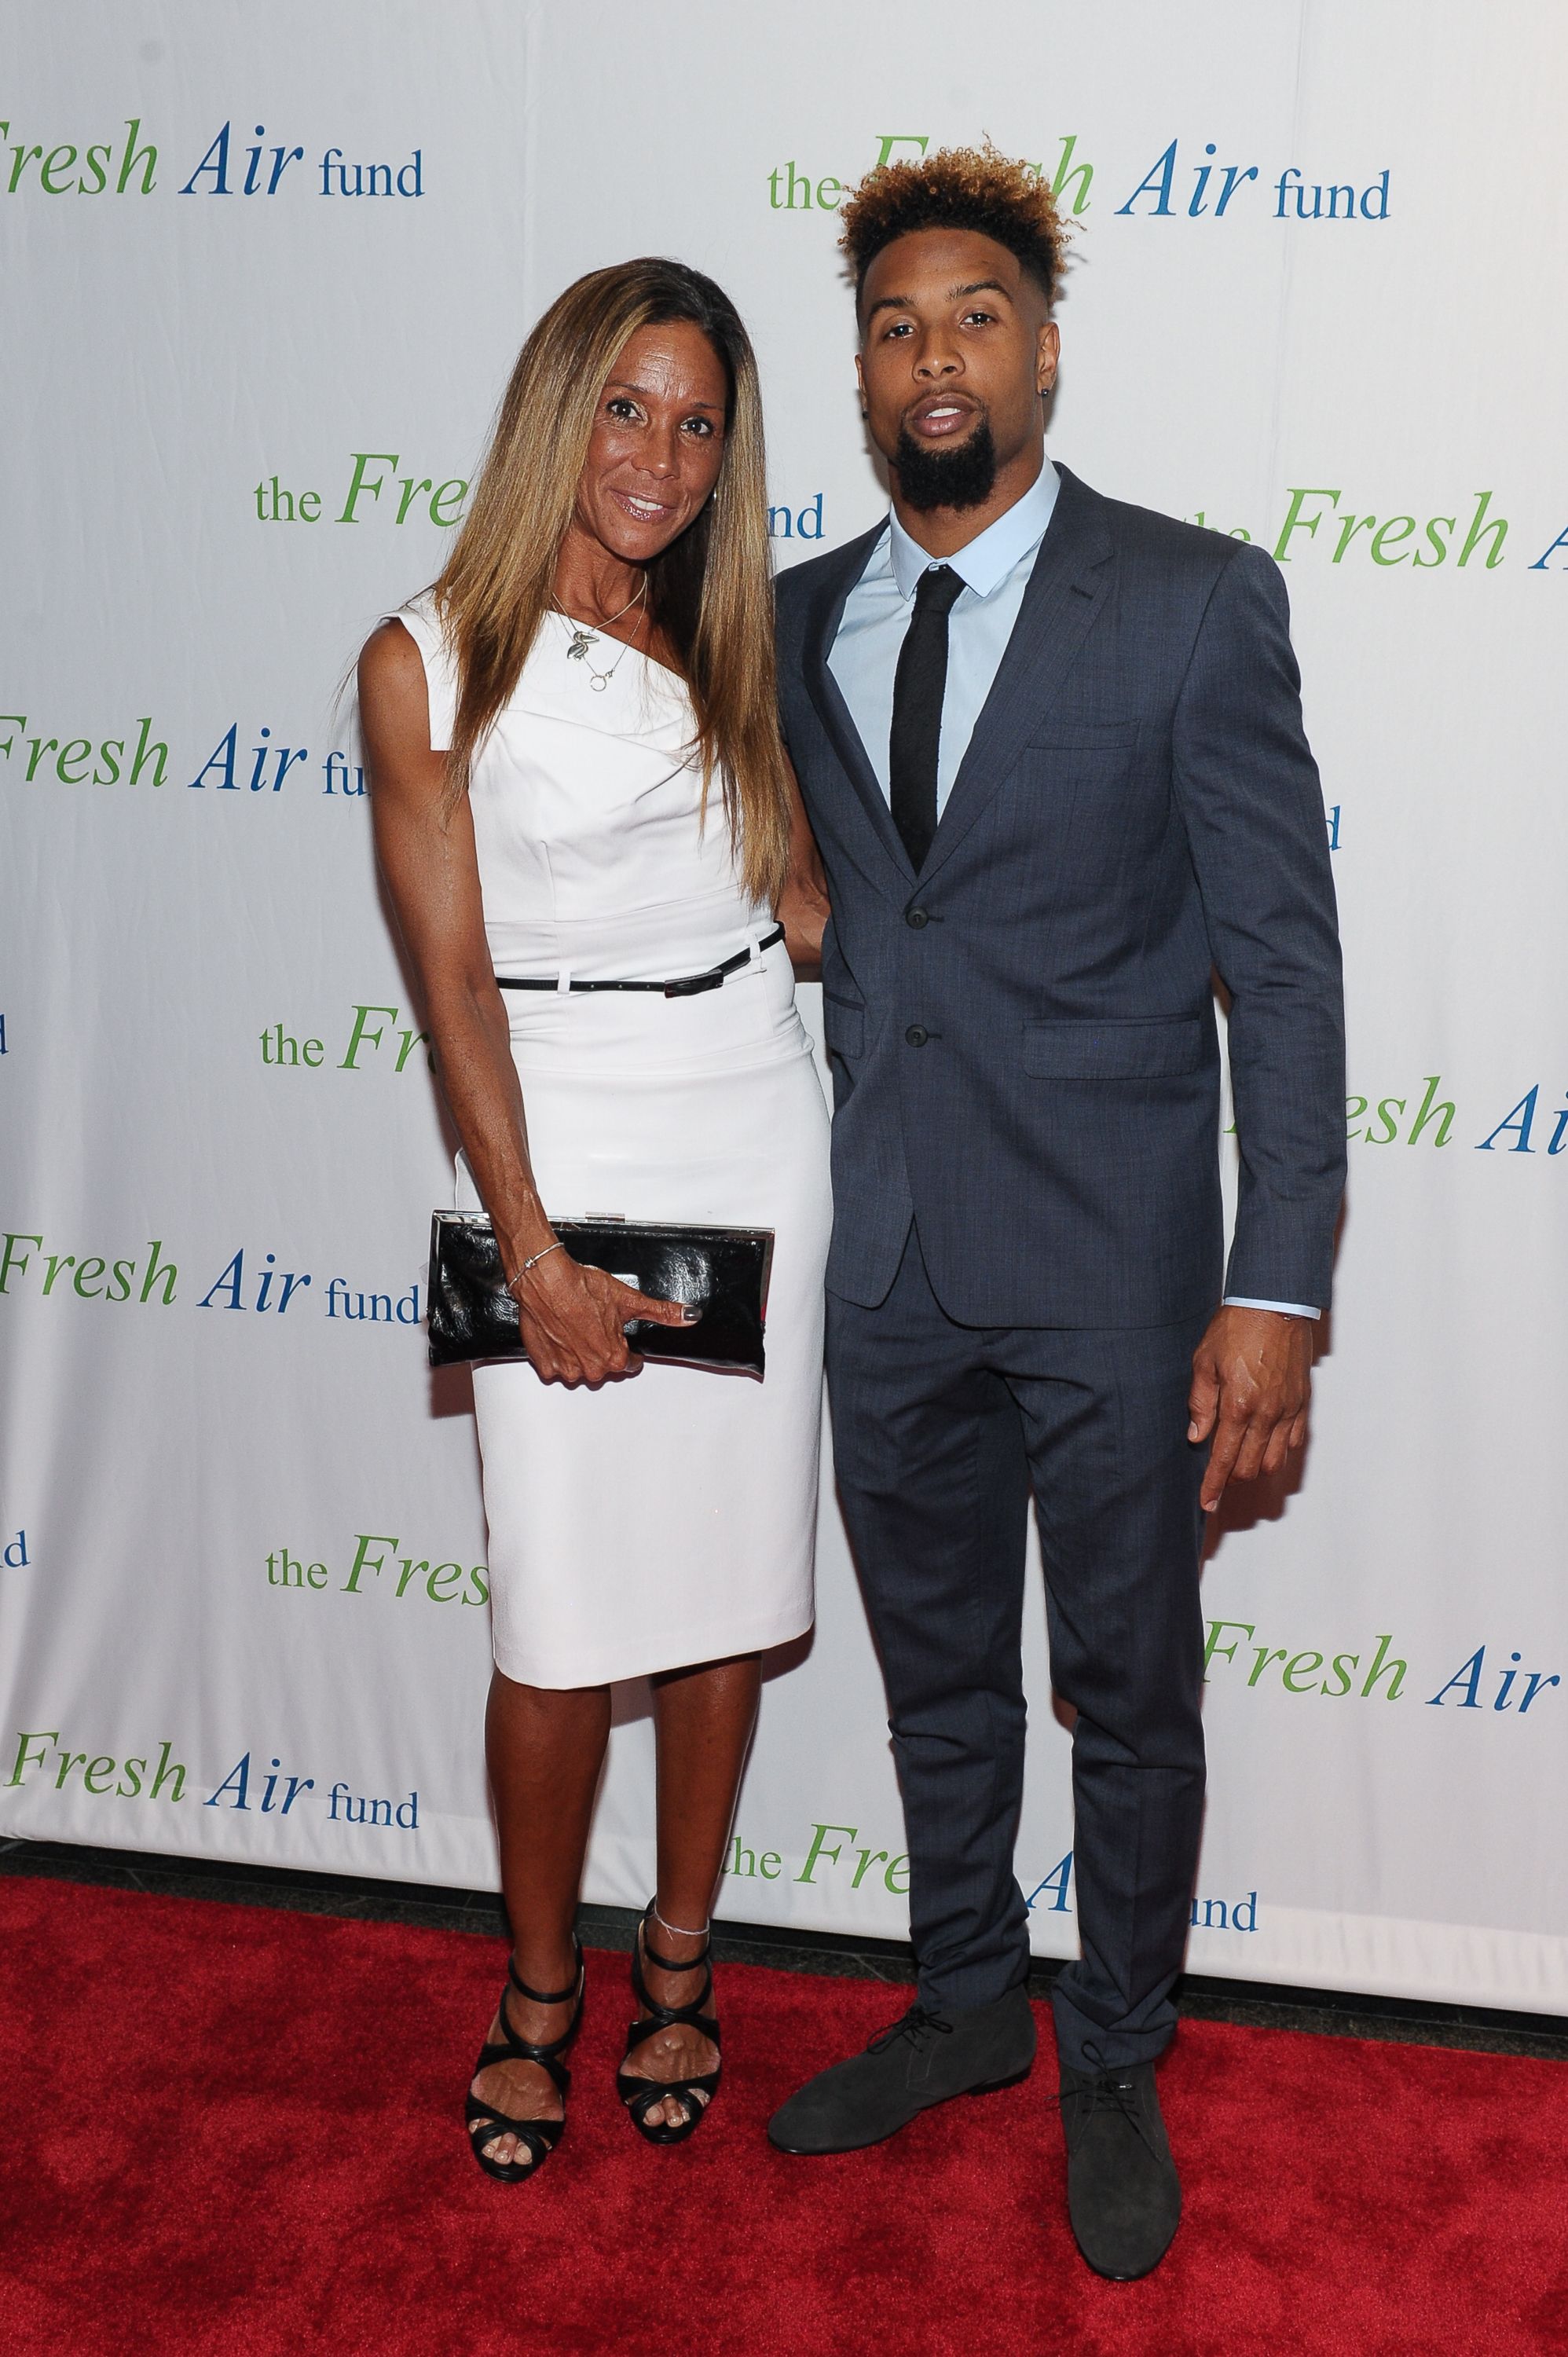 Odell Beckham Jr. and his mother Heather Van Norman attend Fresh Air Fund's Salute to American Heroes in 2015 in New York City | Source: Getty Images